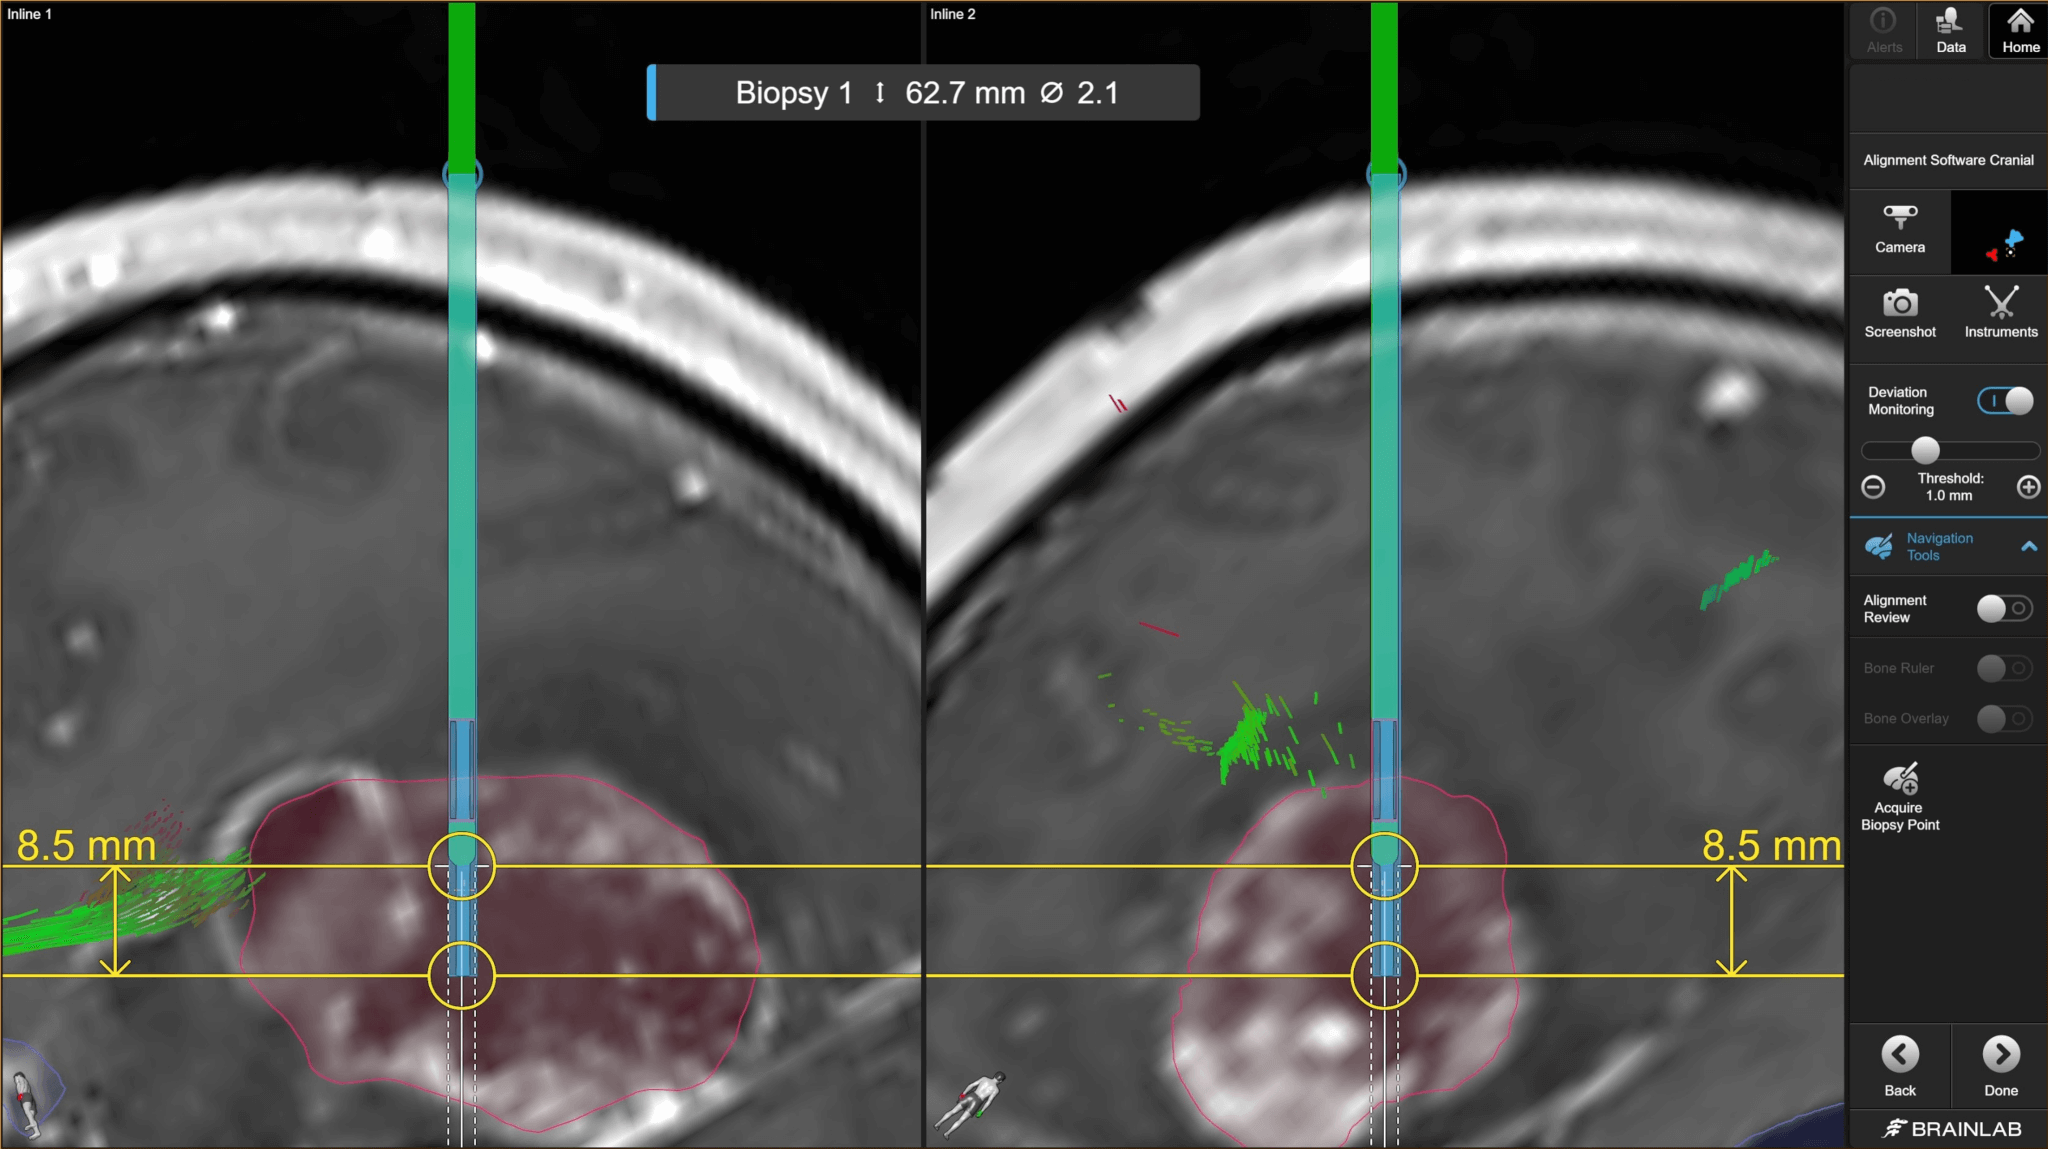 Screenshot: Real-time tracking of the Biopsy Needle using Brainlab navigation software and Cirq